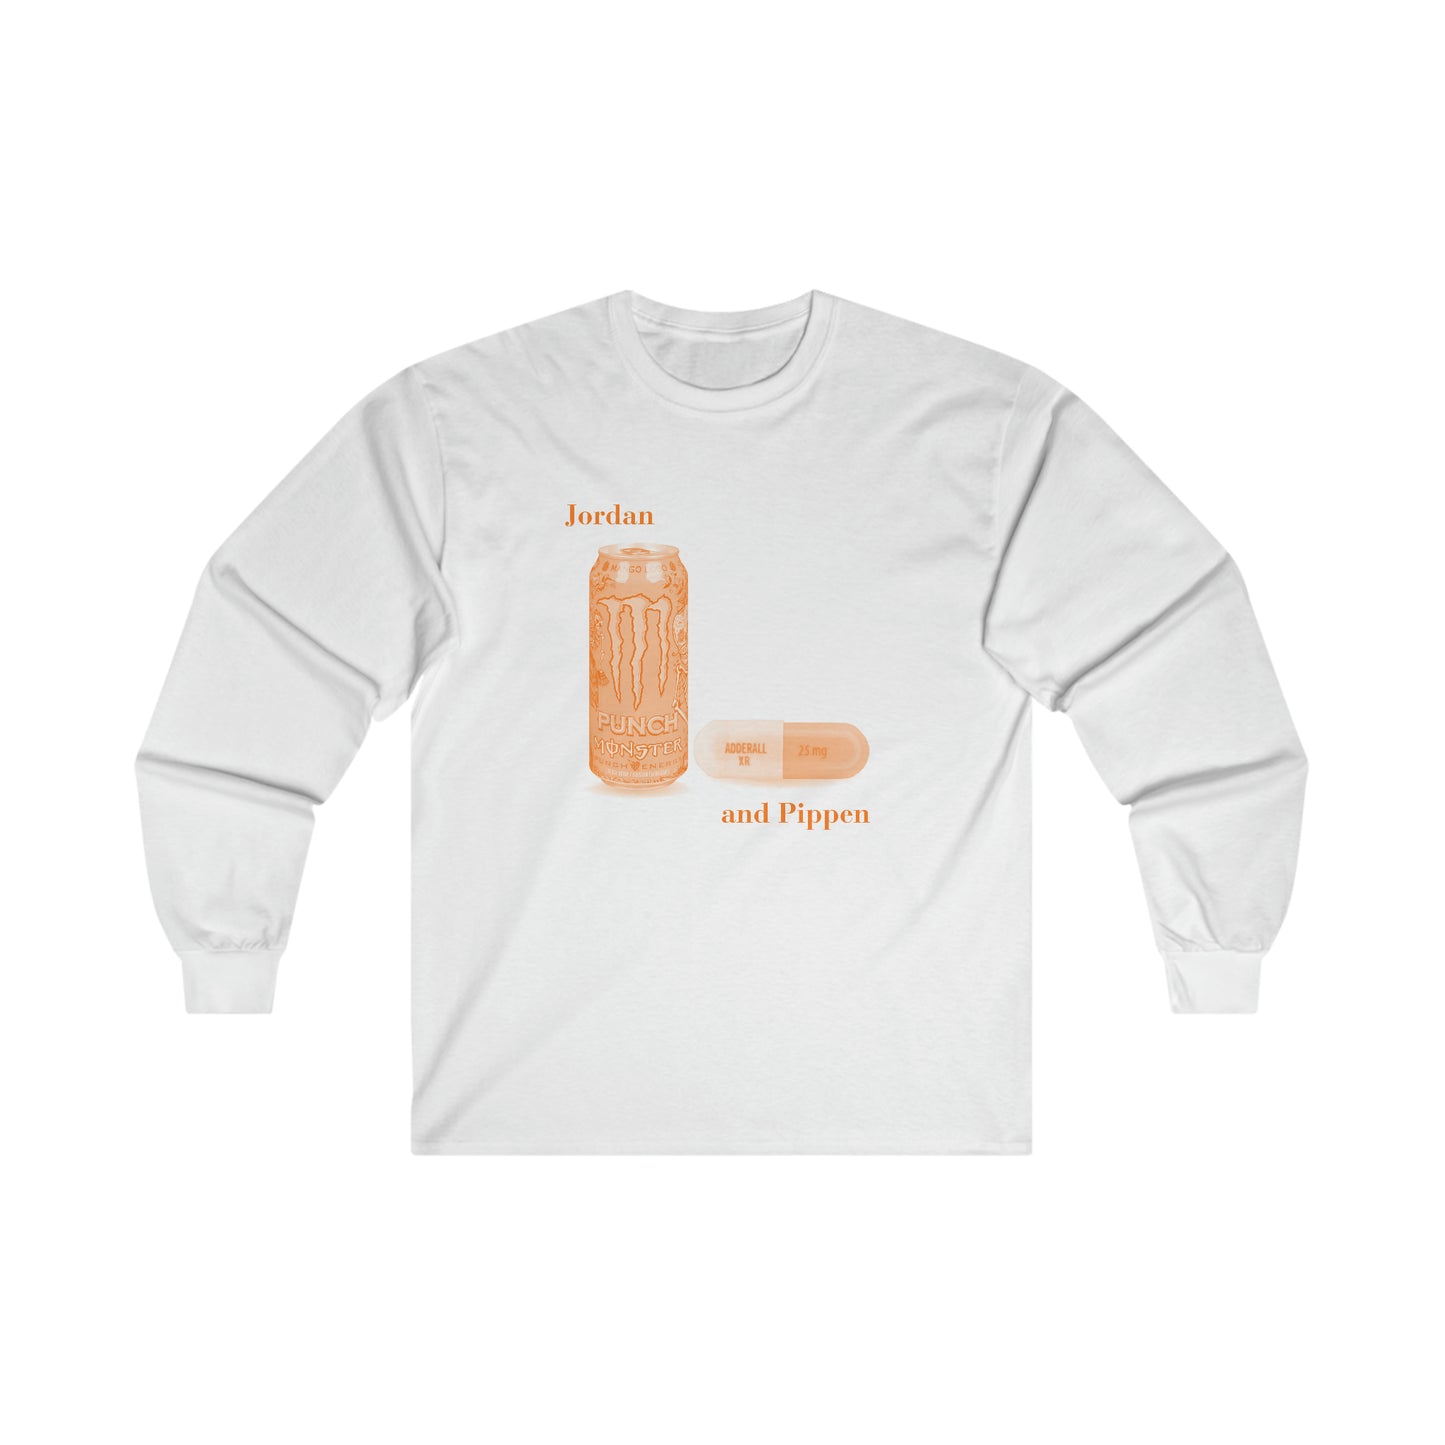 Jordan and Pippen Monster and Adderall - Ultra Cotton Long Sleeve Tee